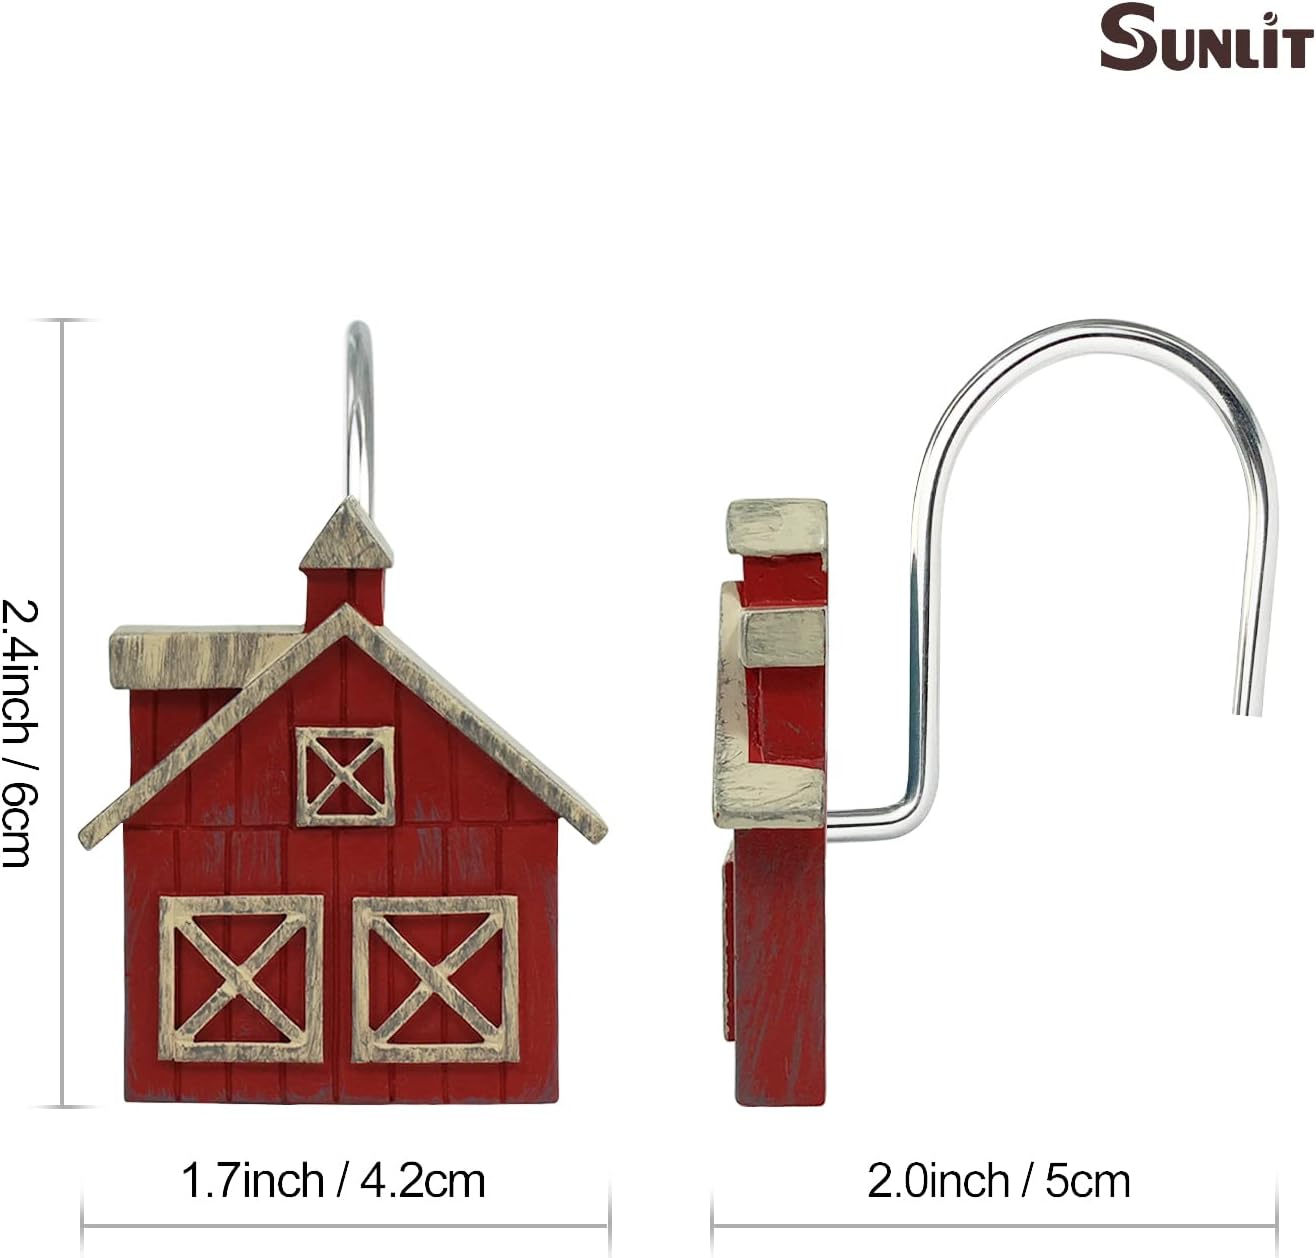 Sunlit Farmhouse Barn Christmas Shower Curtain Hooks, Rustic Red House Decorative Shower Curtain Rings, Resin, Wooden Plank Rural Country Bathroom Decoration Shower Curtain Hooks-12 Pack